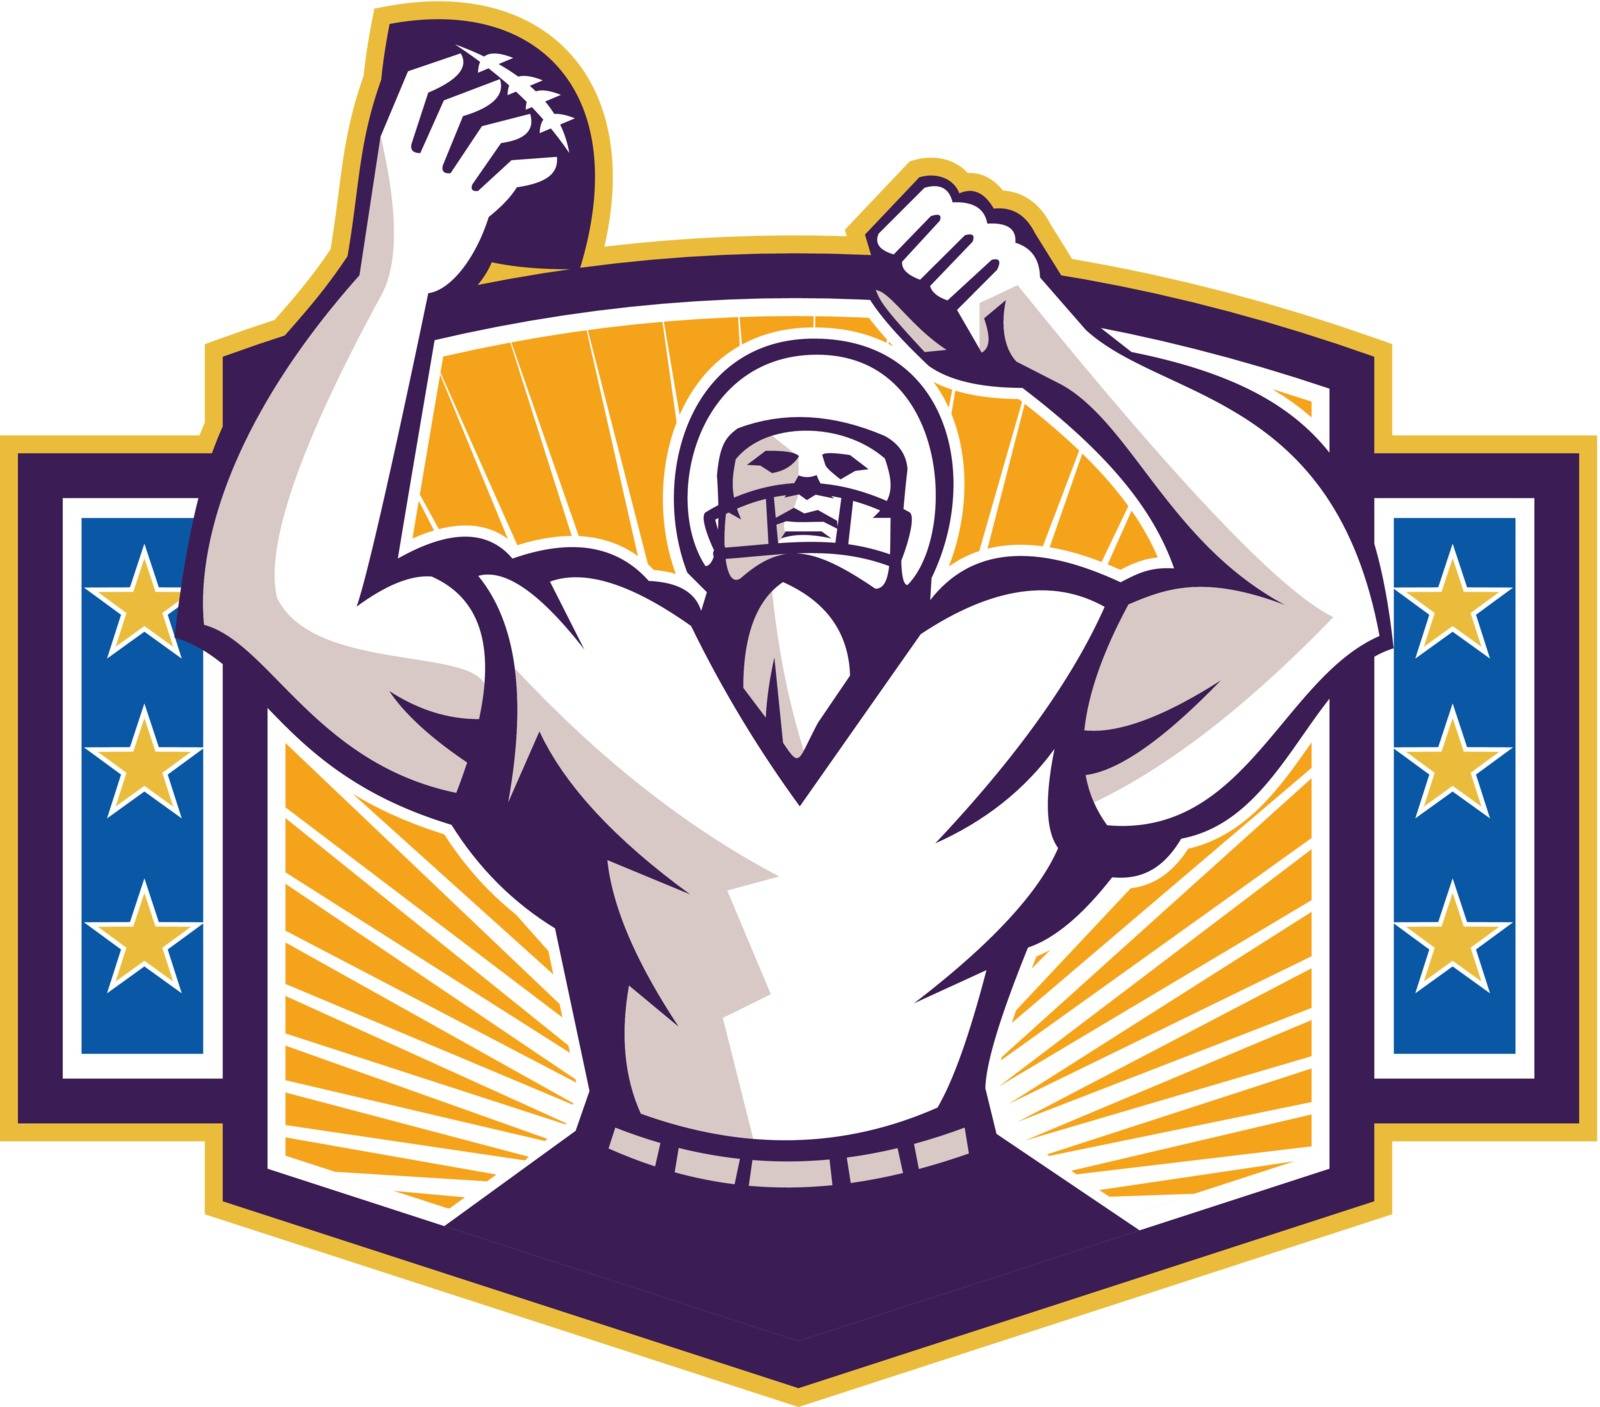 Illustration of an american football gridiron wide receiver running back player celebrating a touchdown facing front set inside shield crest with stars and sunburst done in retro style on isolated background.